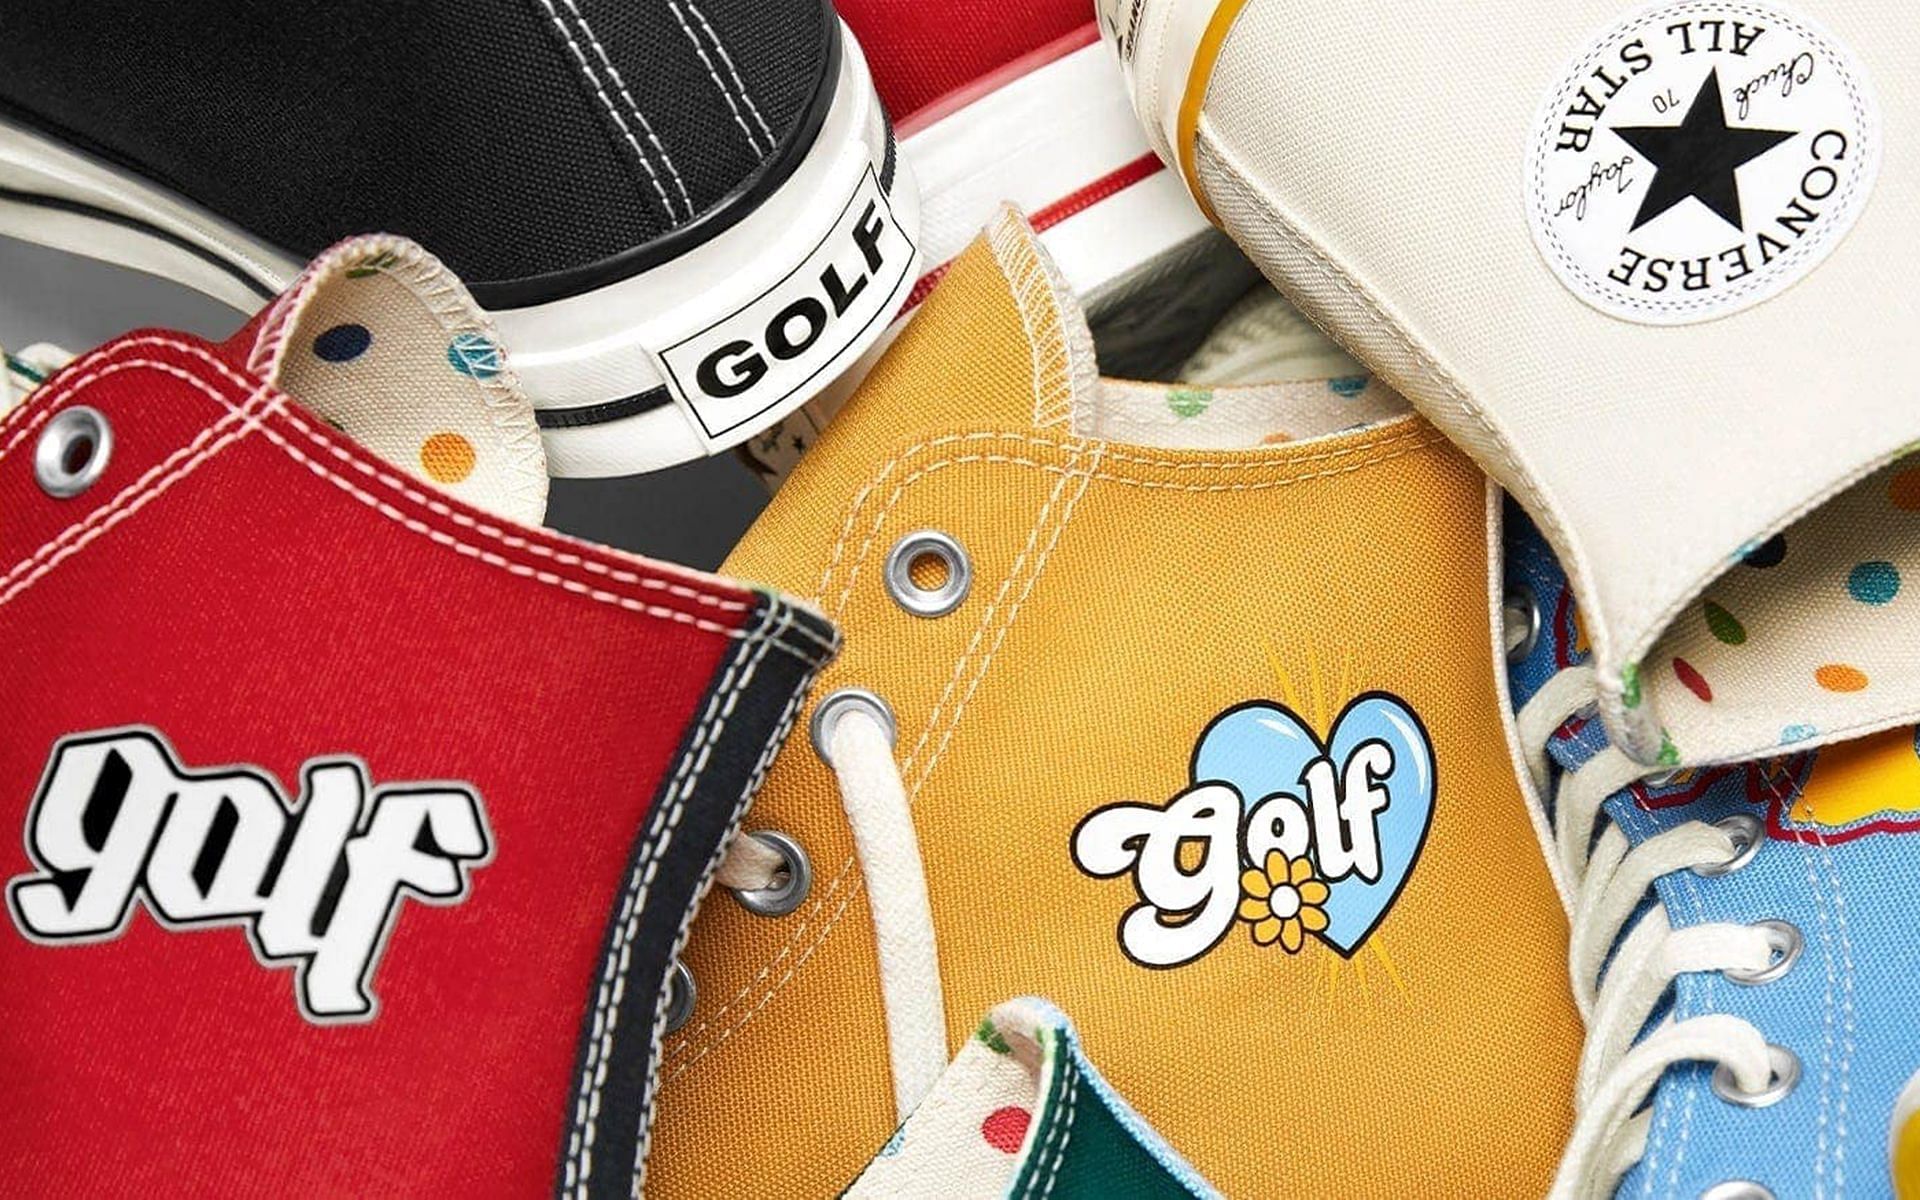 Converse X Golf collab: date, price, and more about the By experience